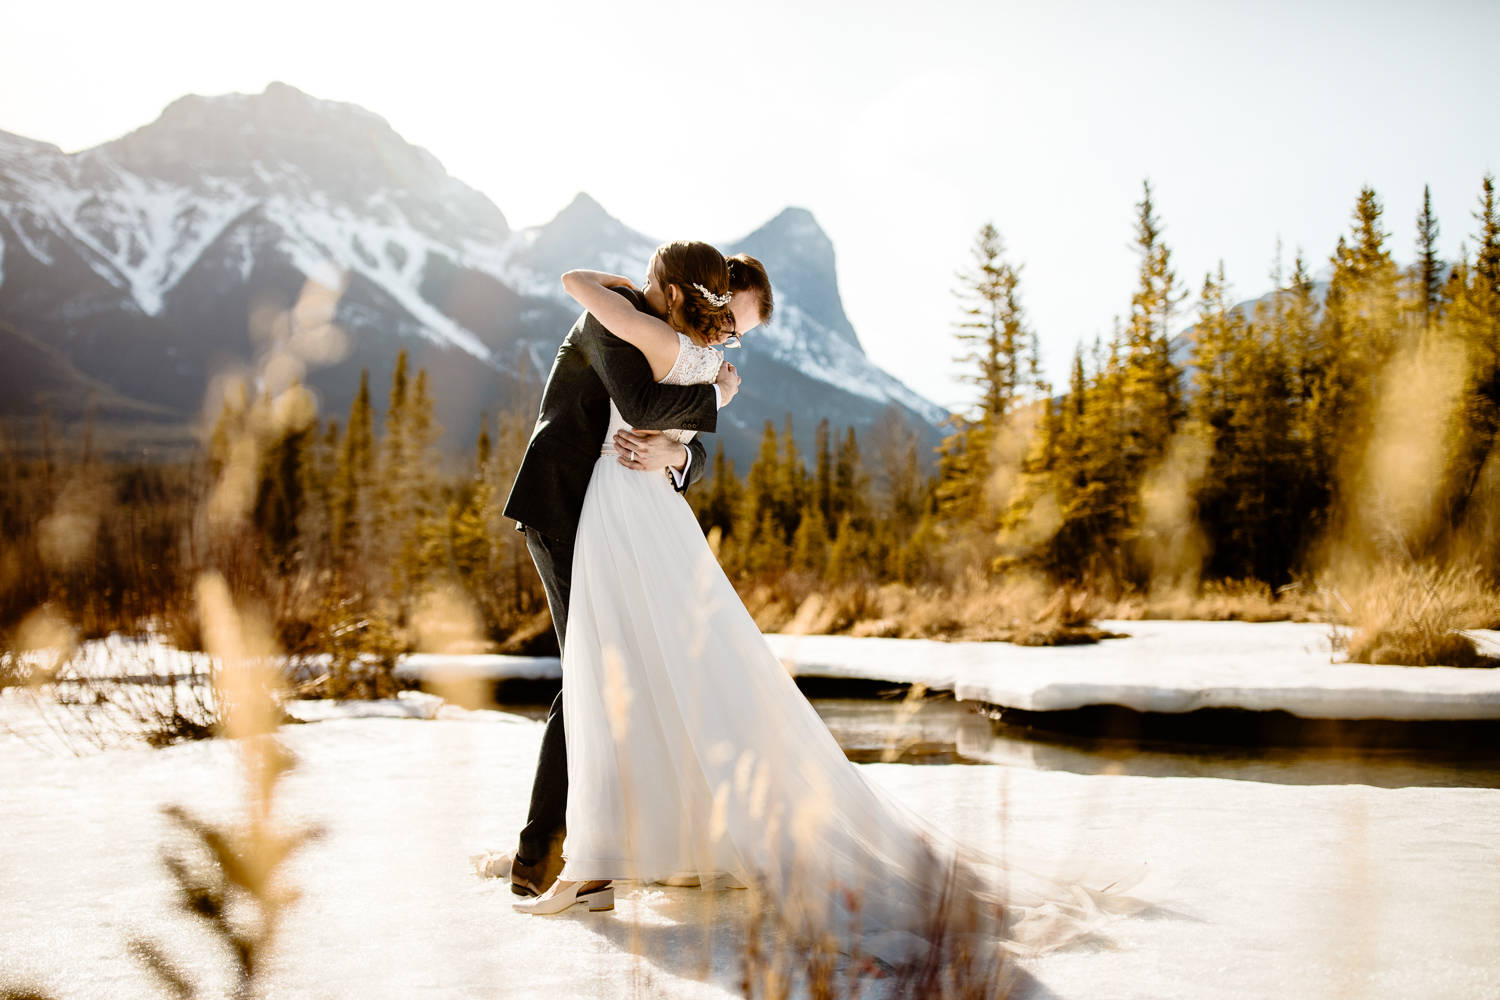 Canmore wedding photographers at a winter wedding in the Canadian Rockies